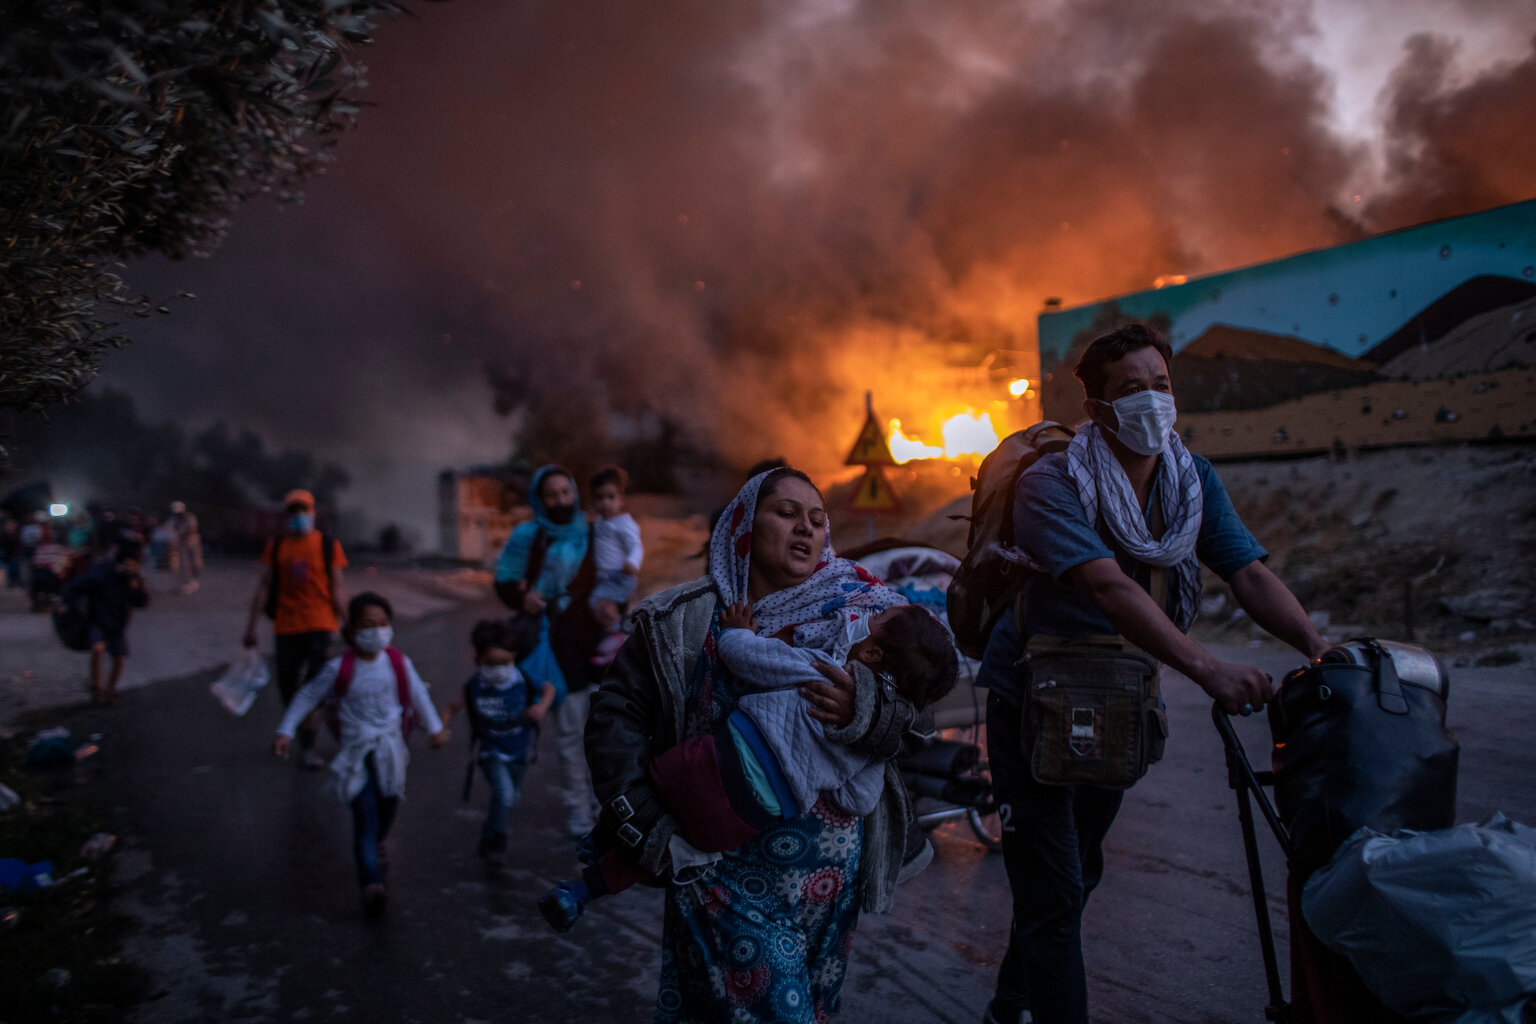  Refugees and migrants carrying their belongings flee a fire burning at Moria camp, on Lesbos island, Greece, Wednesday, Sept. 9, 2020. (AP Photo/Petros Giannakouris) 